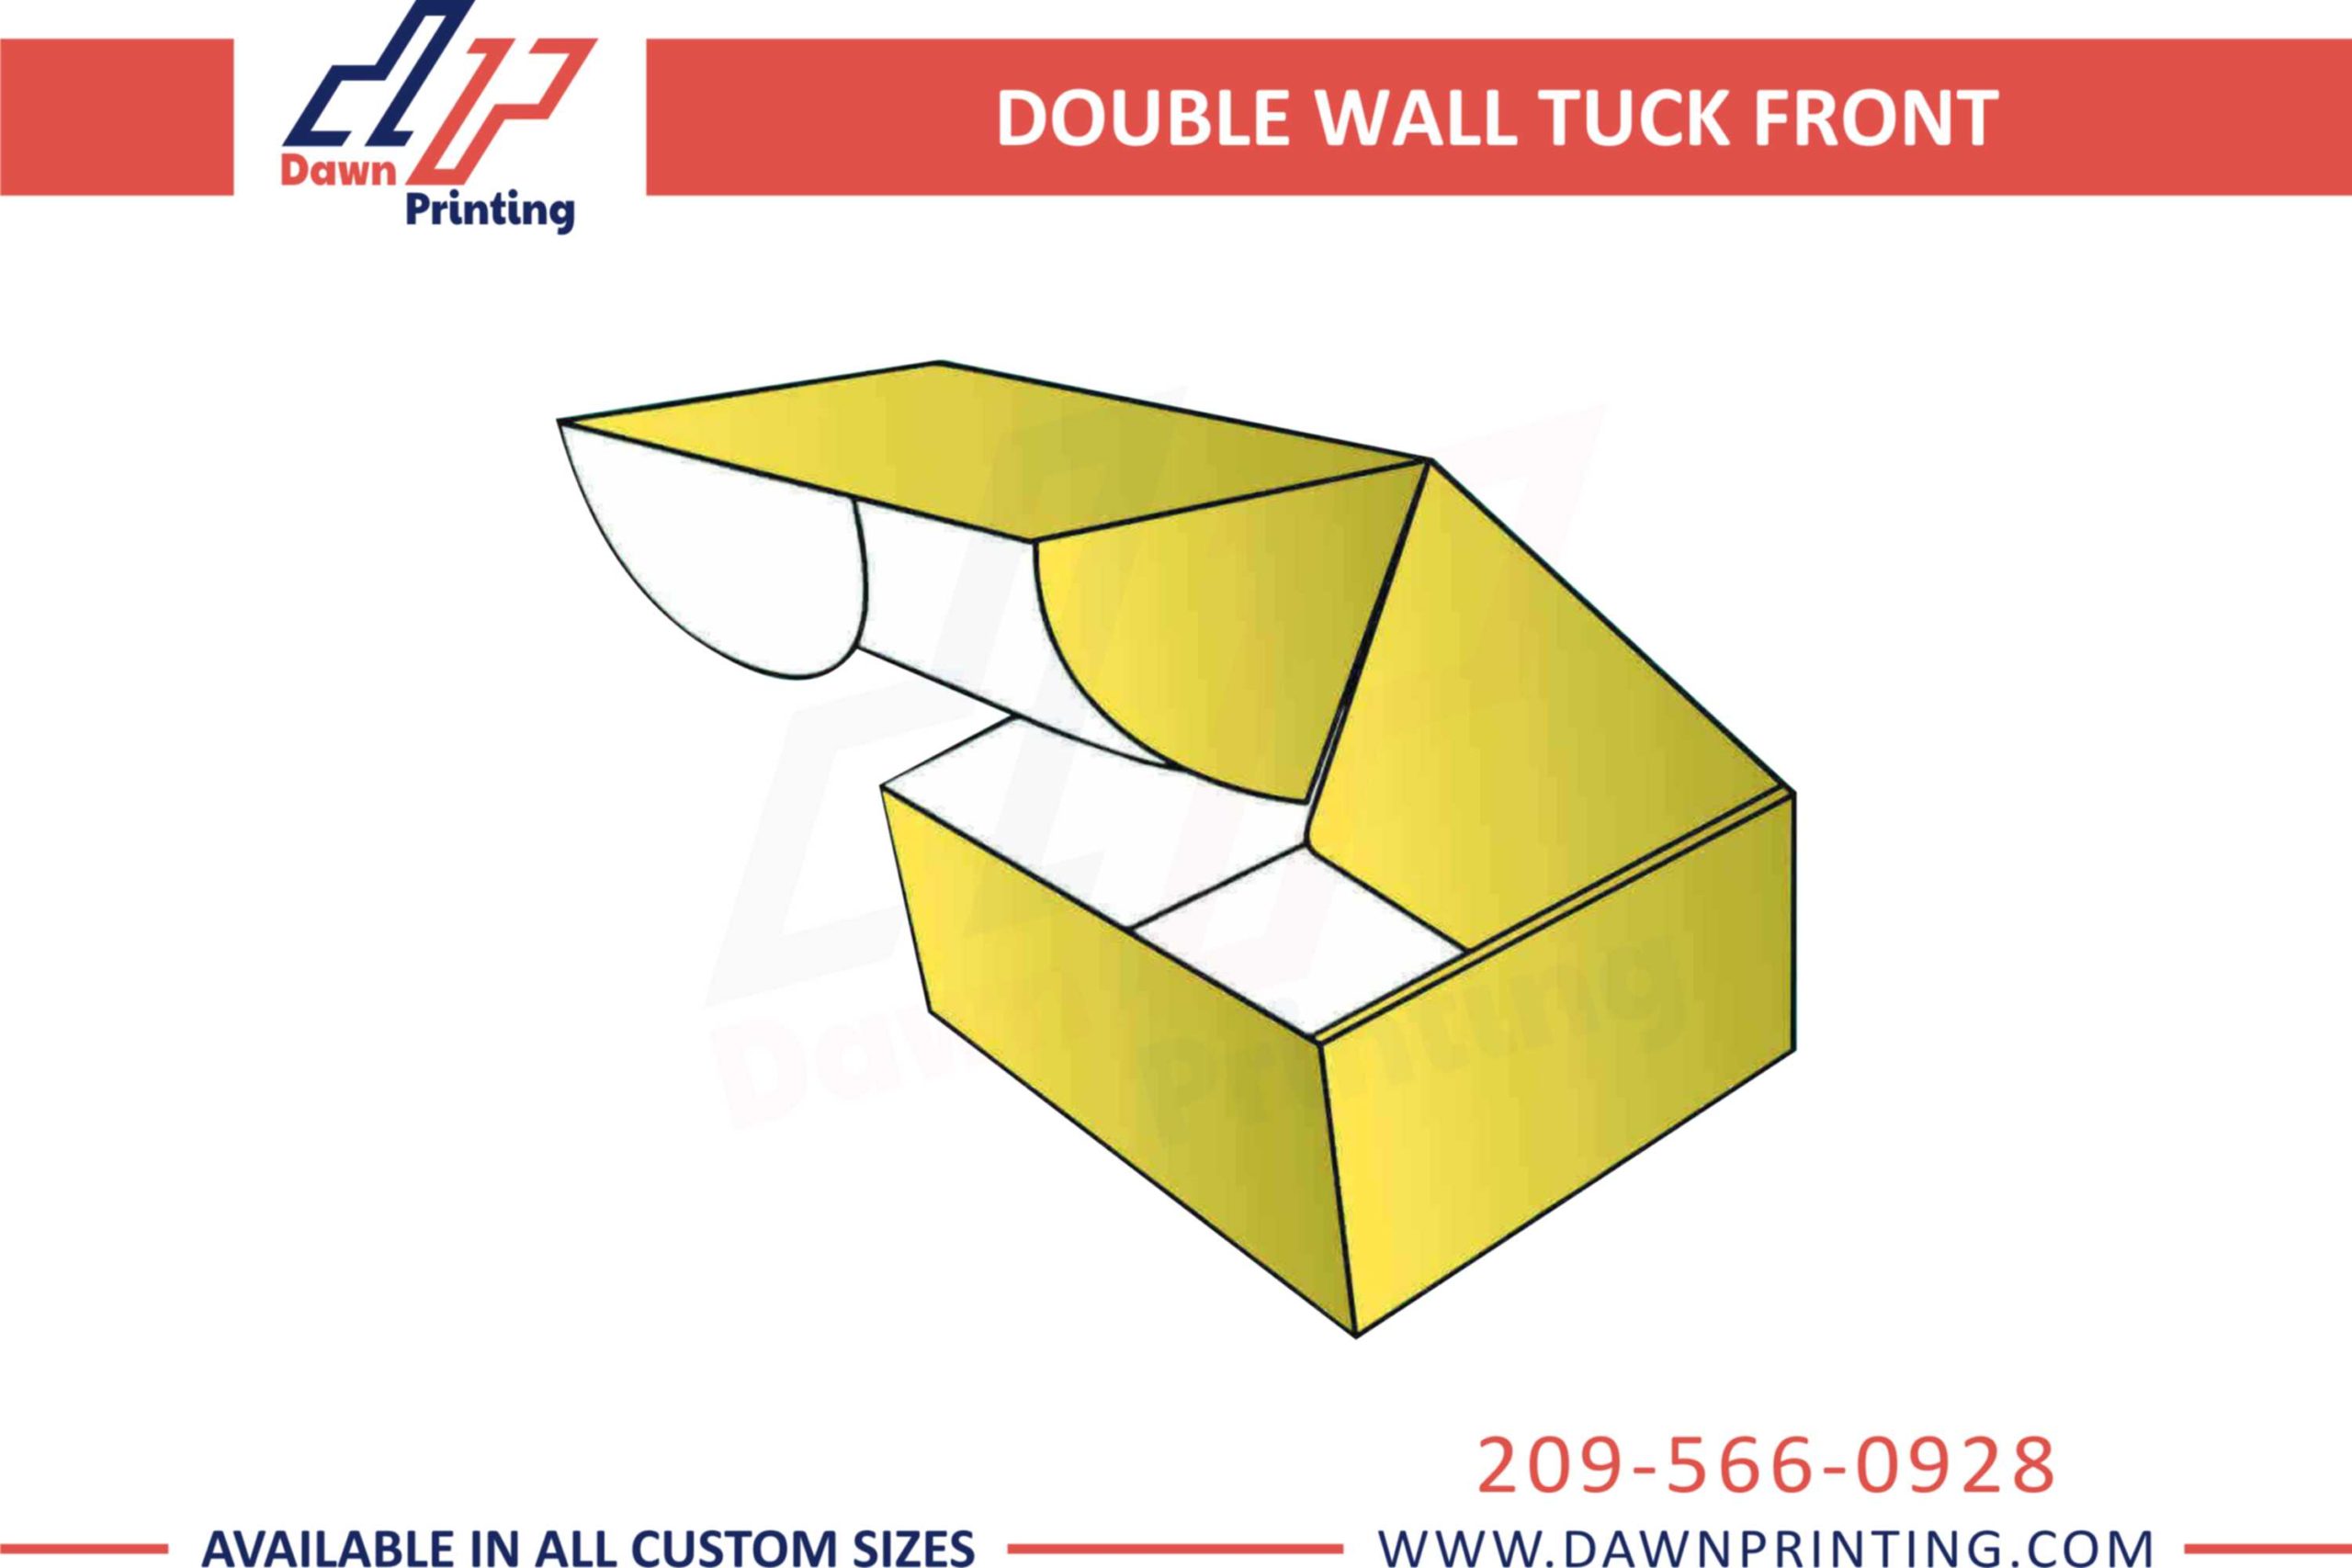 Wholesale Customized Double Wall Tuck Front Boxes